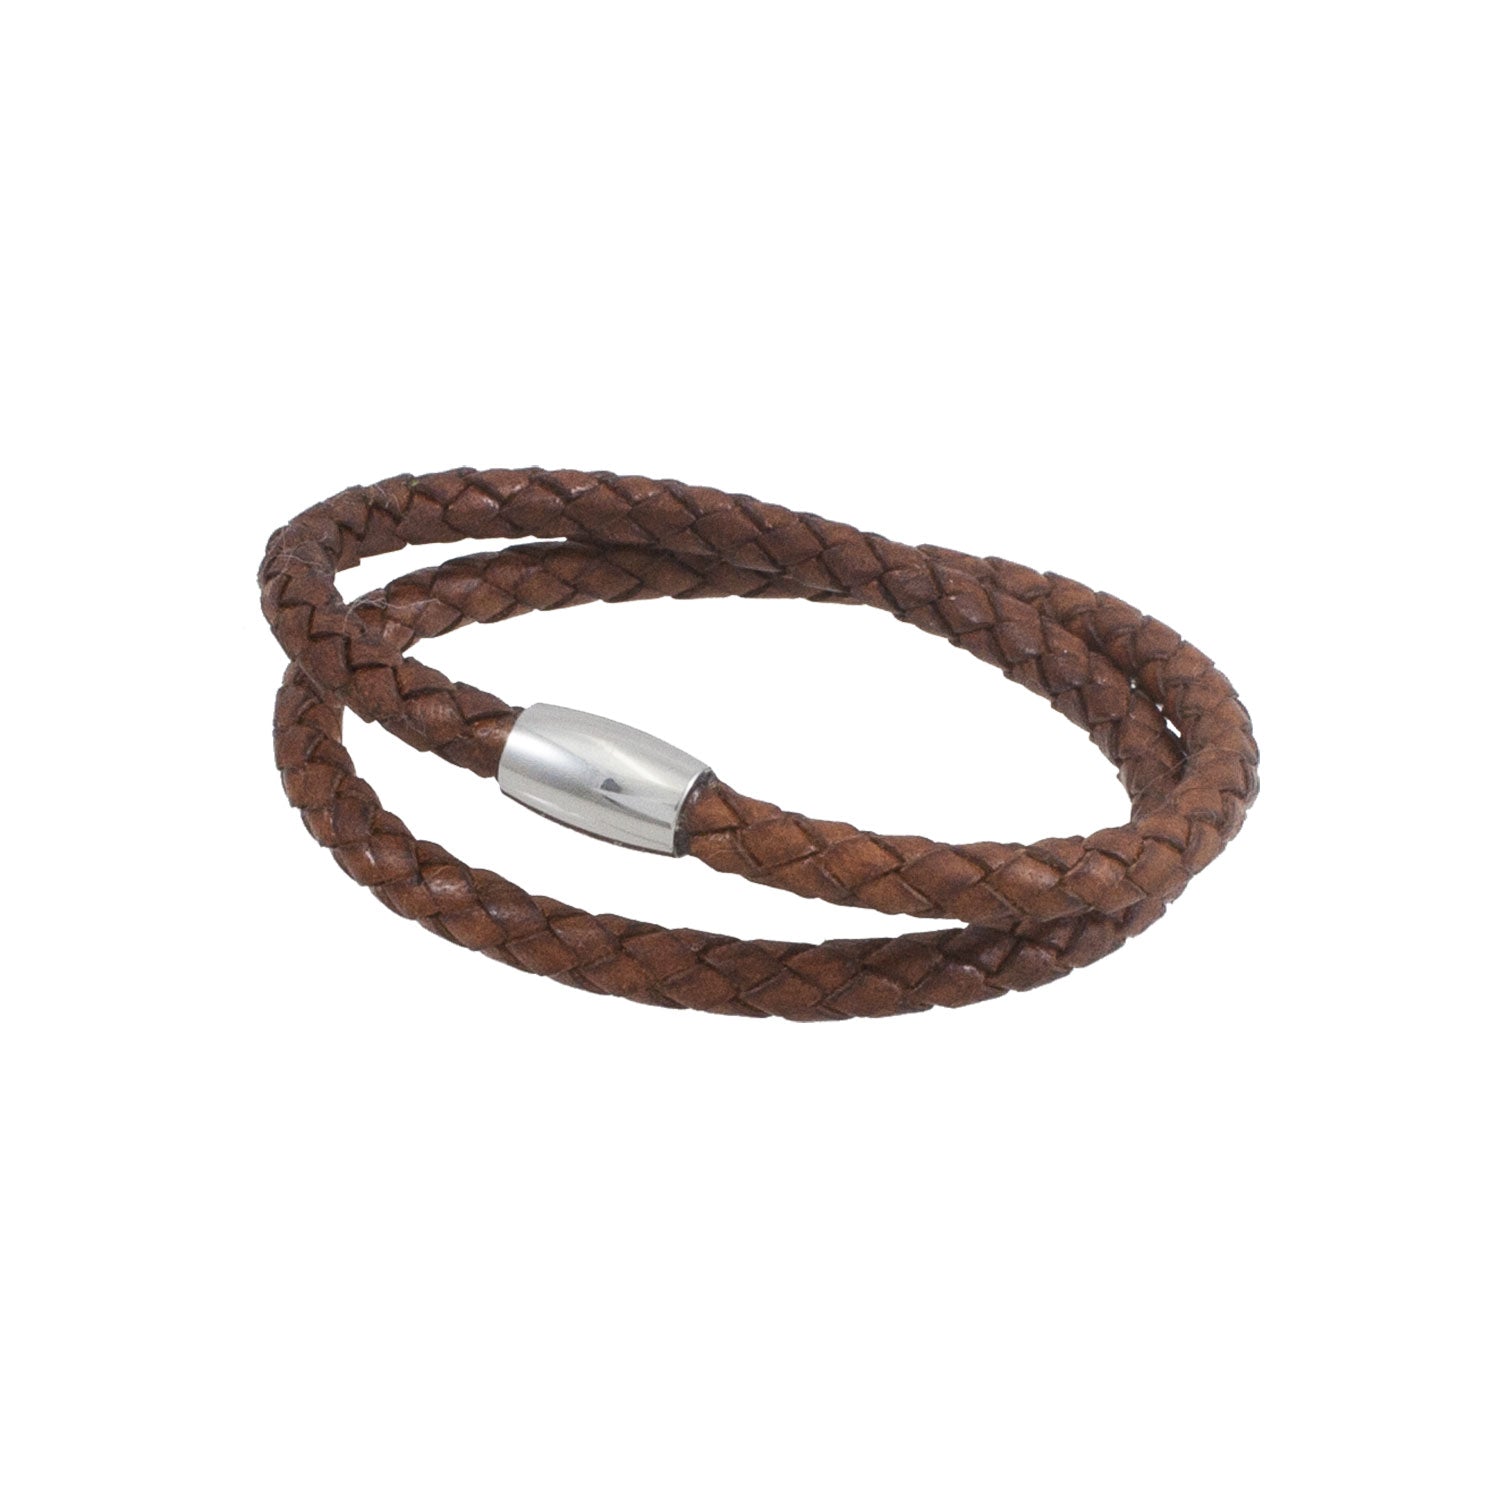 Lorenzo Bracelet in Genuine Scoubidou Leather with Magnetic Clasp for Men